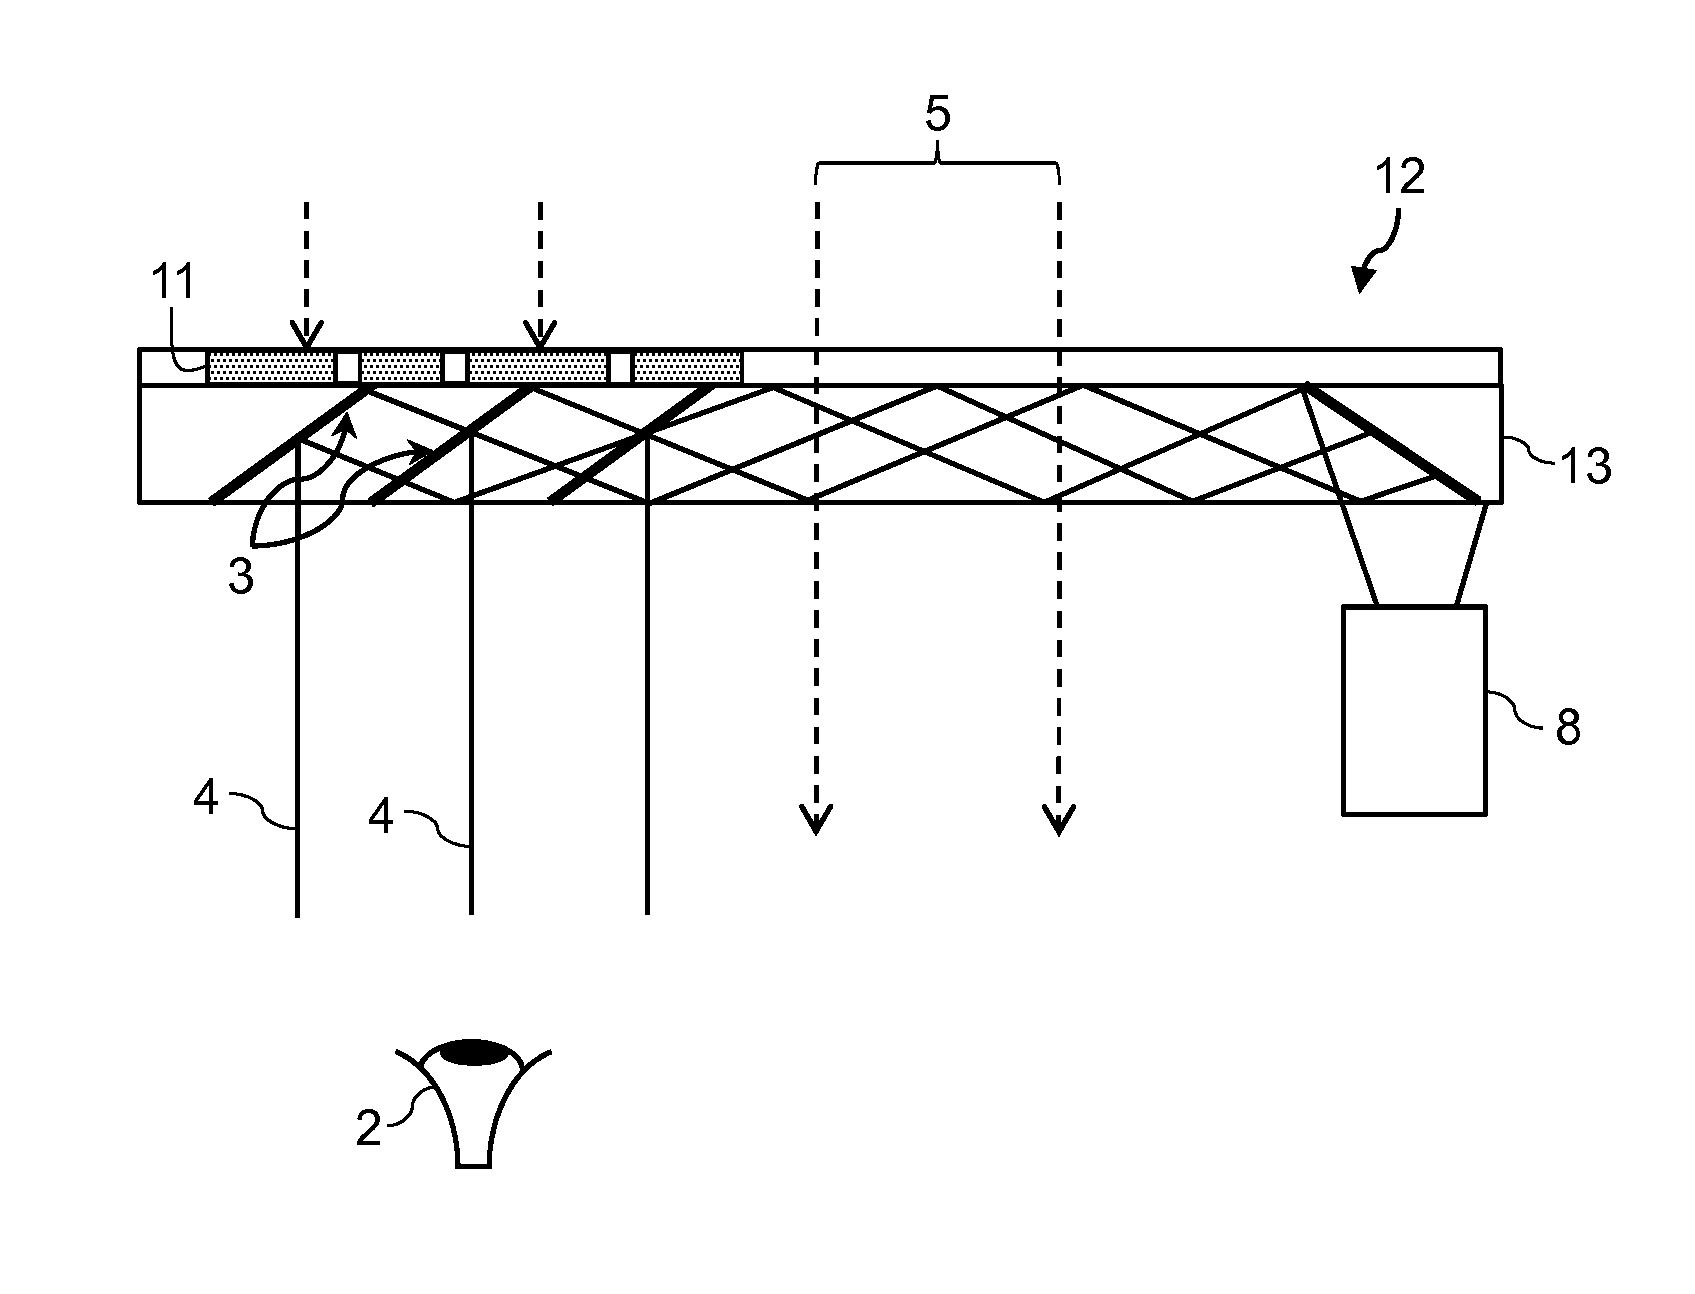 Head-mounted display with biological state detection